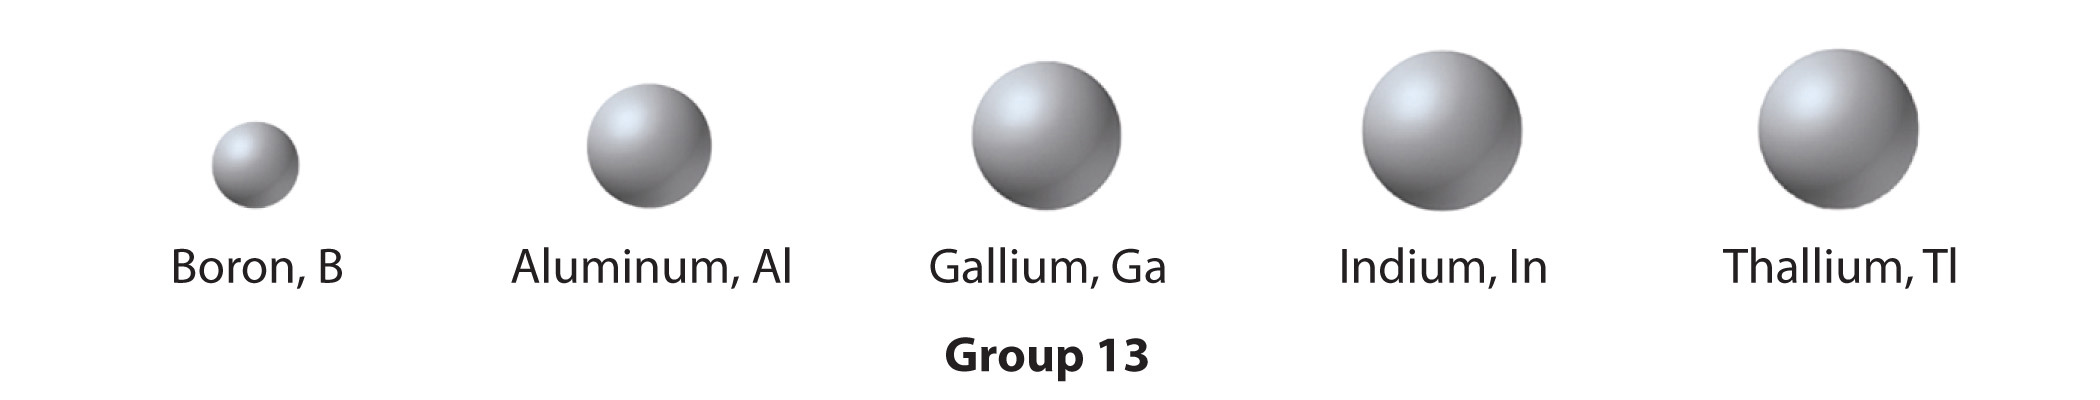 The group 13 elements are shown.